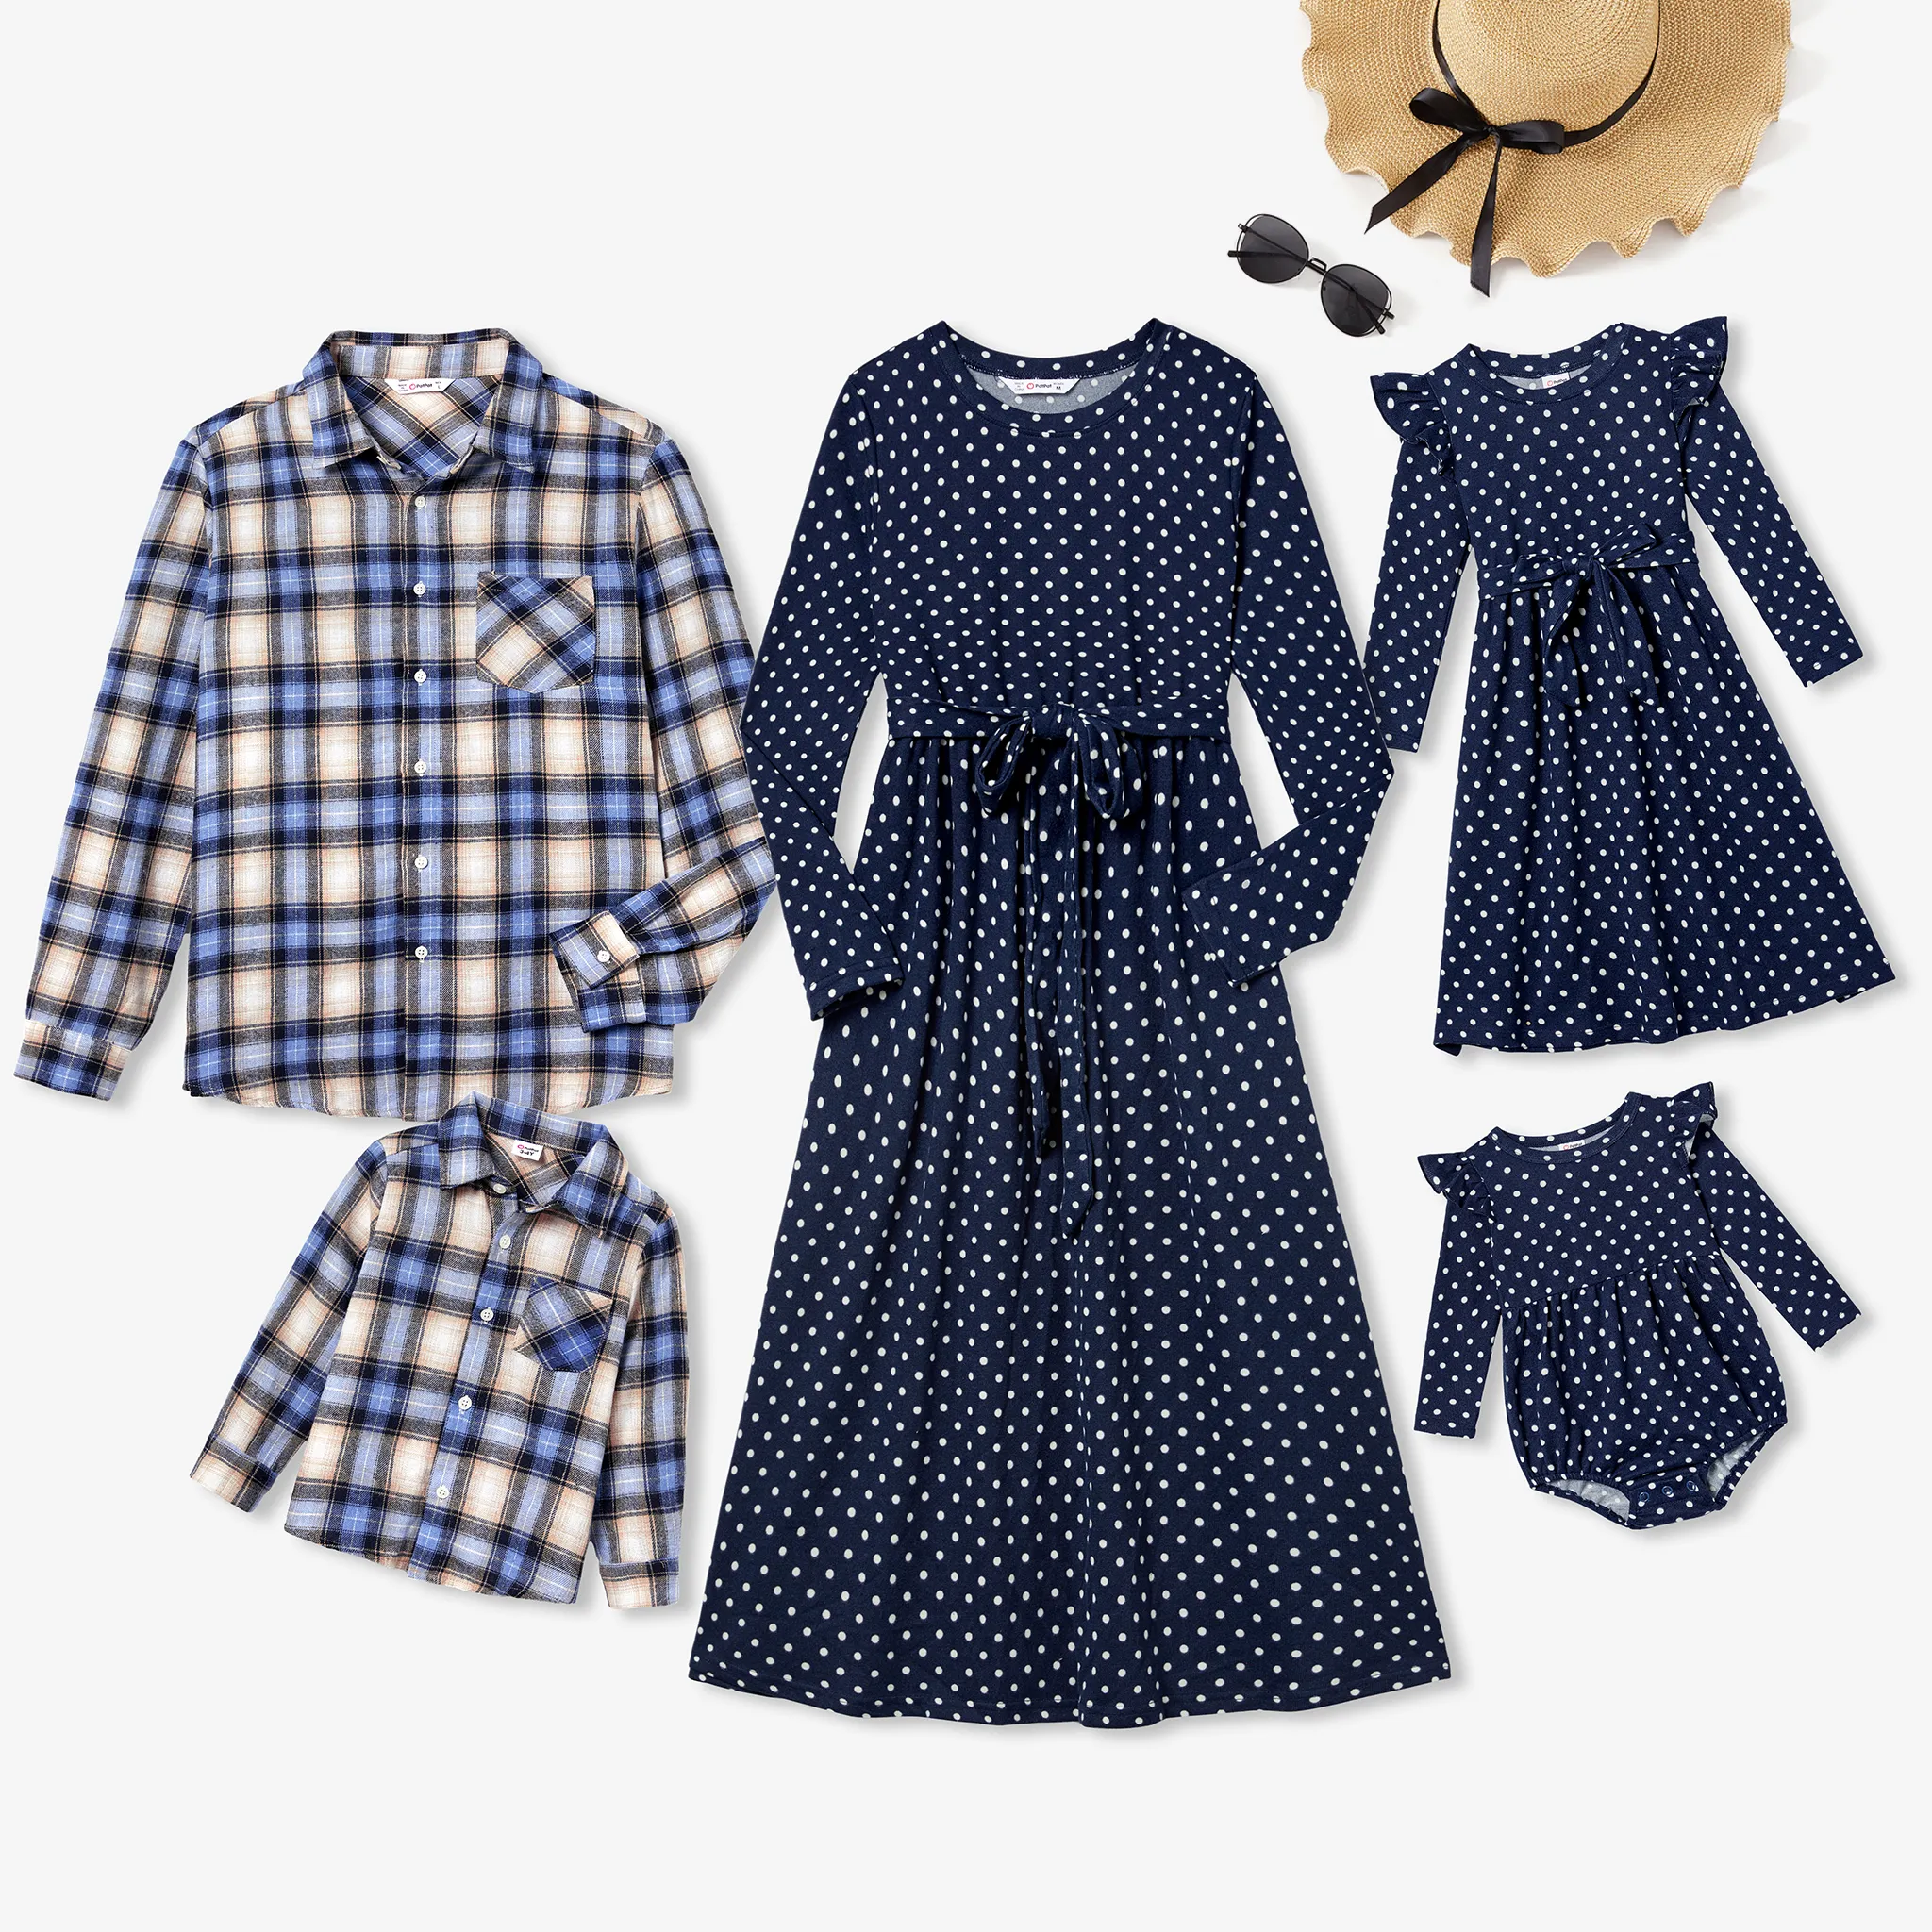 Matching Family Plaid Long-sleeve Tops And Polka Dots Flutter Sleeve Dresses Sets